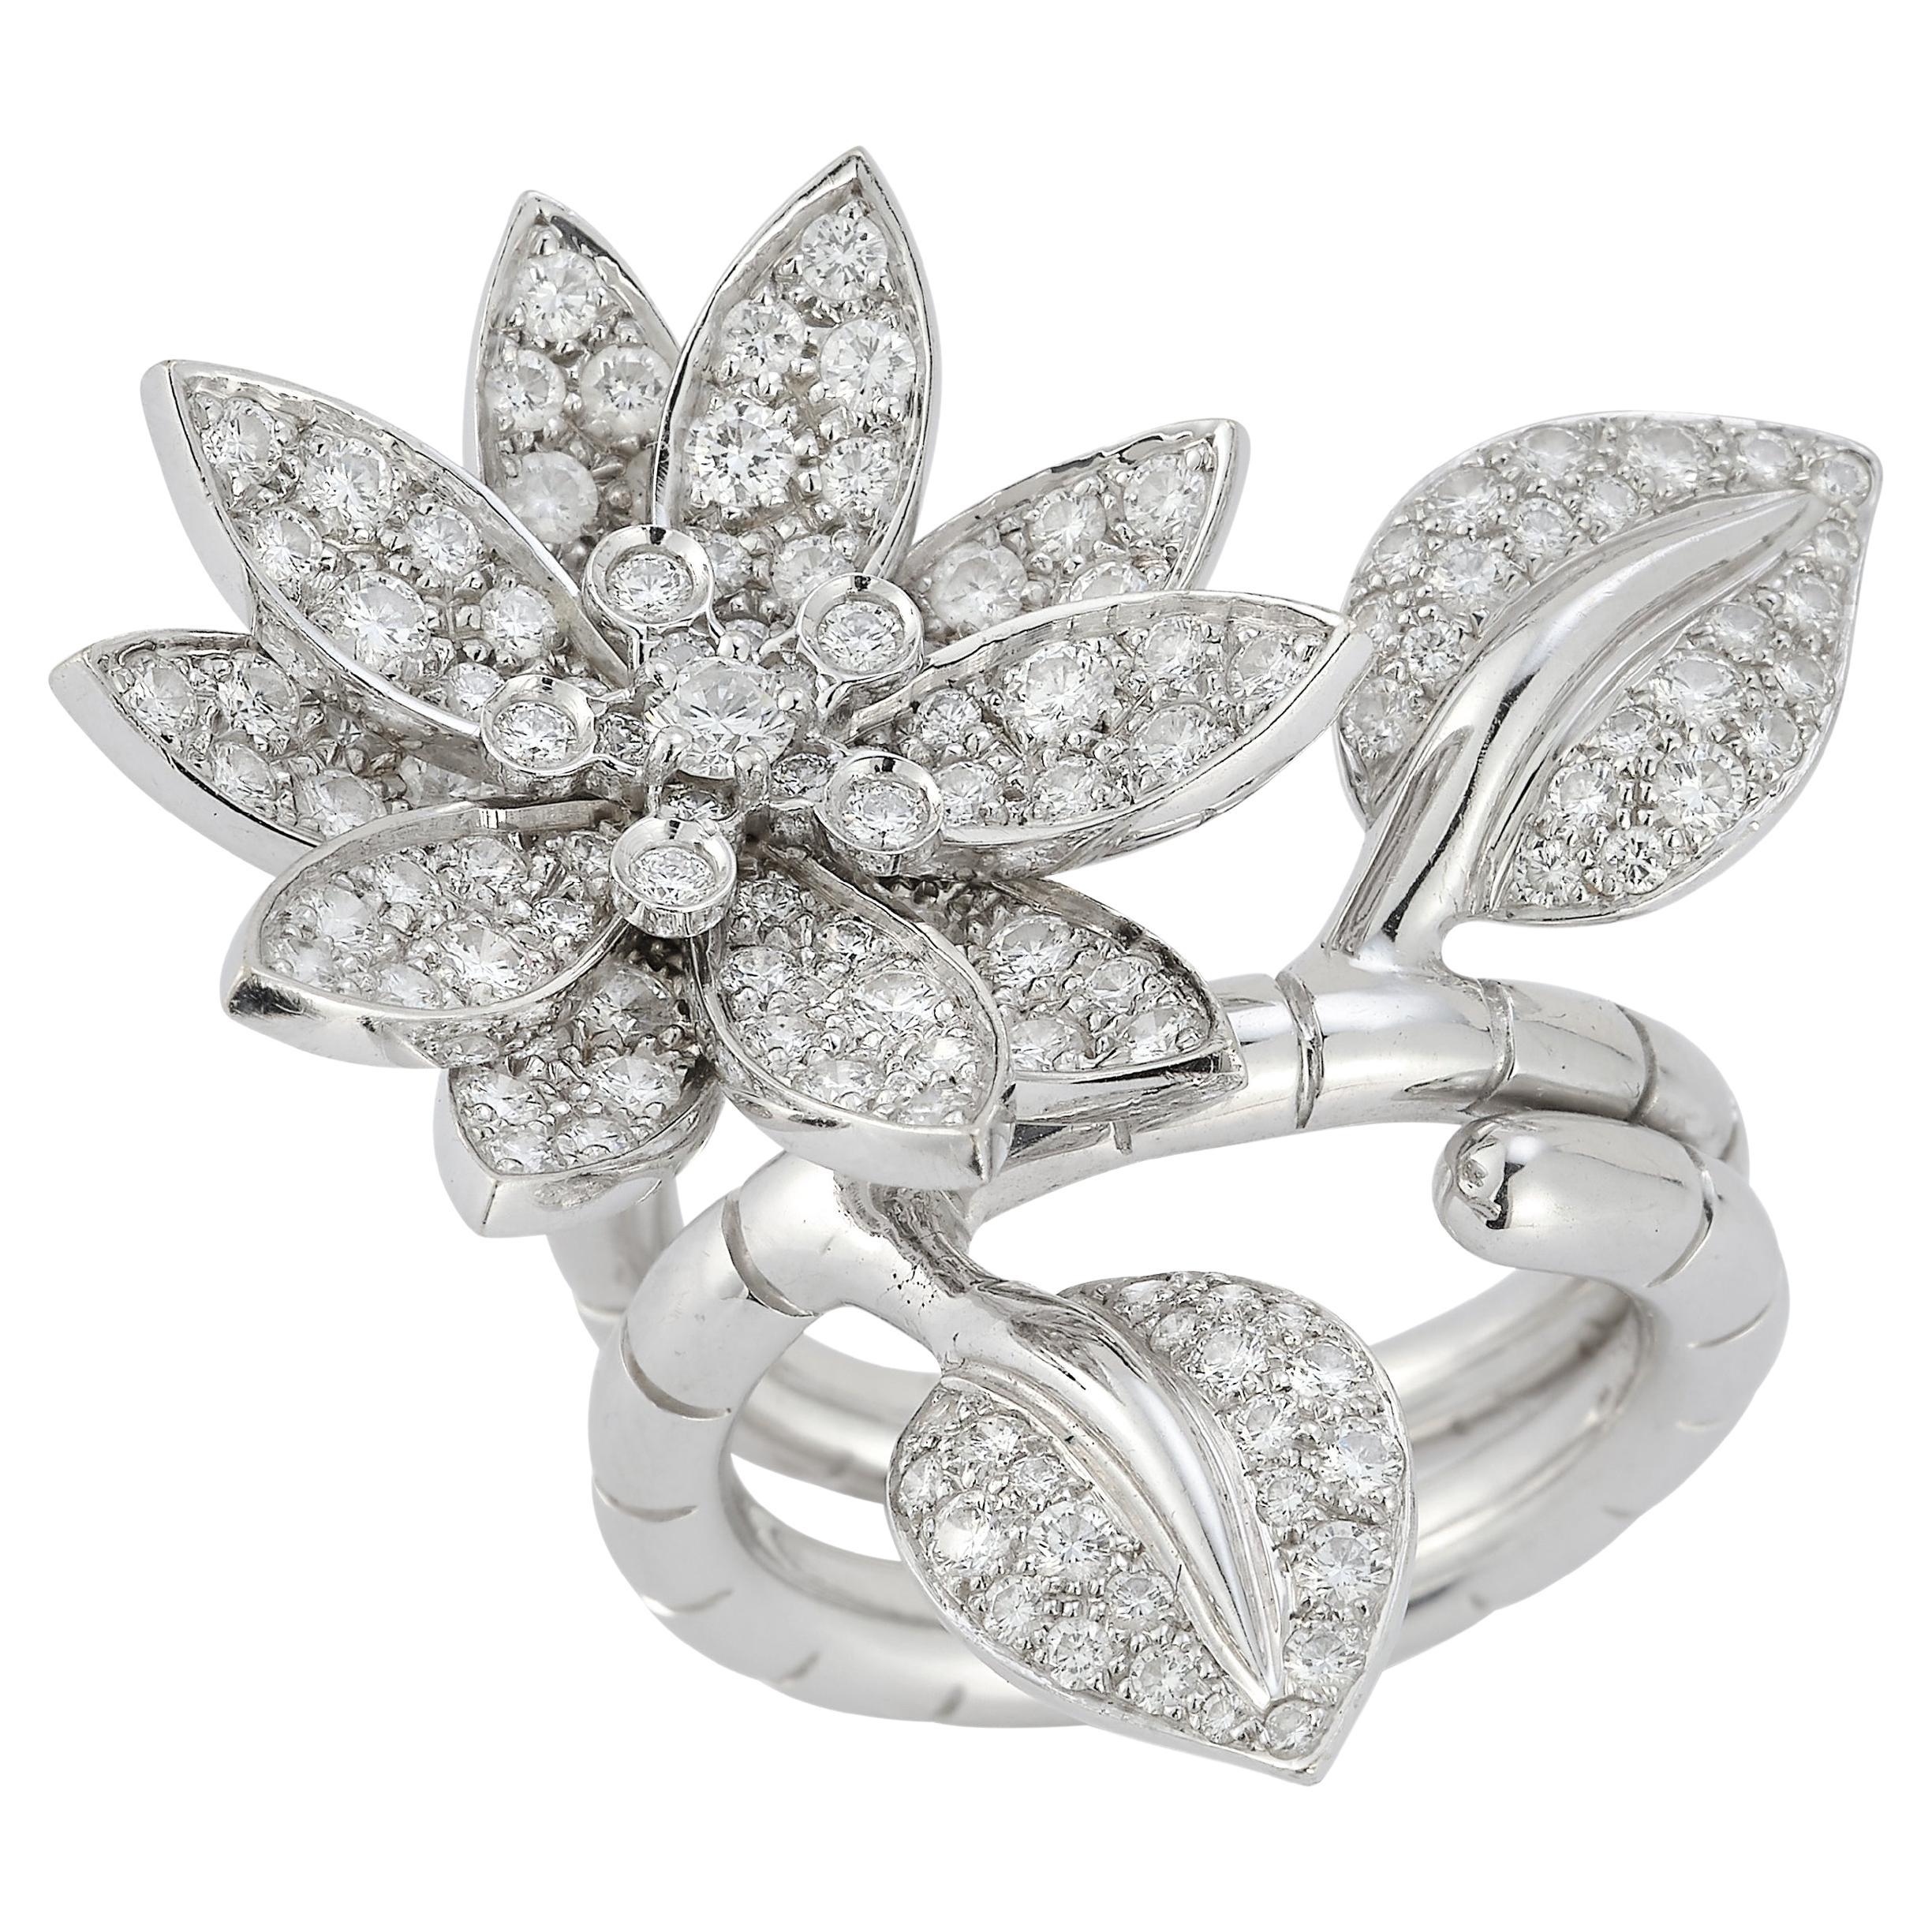 Van Cleef and Arpels Diamond Lotus Between The Finger Ring 

An 18k white gold ring in the design of a lotus flower set with 127 round diamonds with a total weight of 2.14ct. 

Transforms into a between the finger ring.

Listed on Van Cleef & Arpels